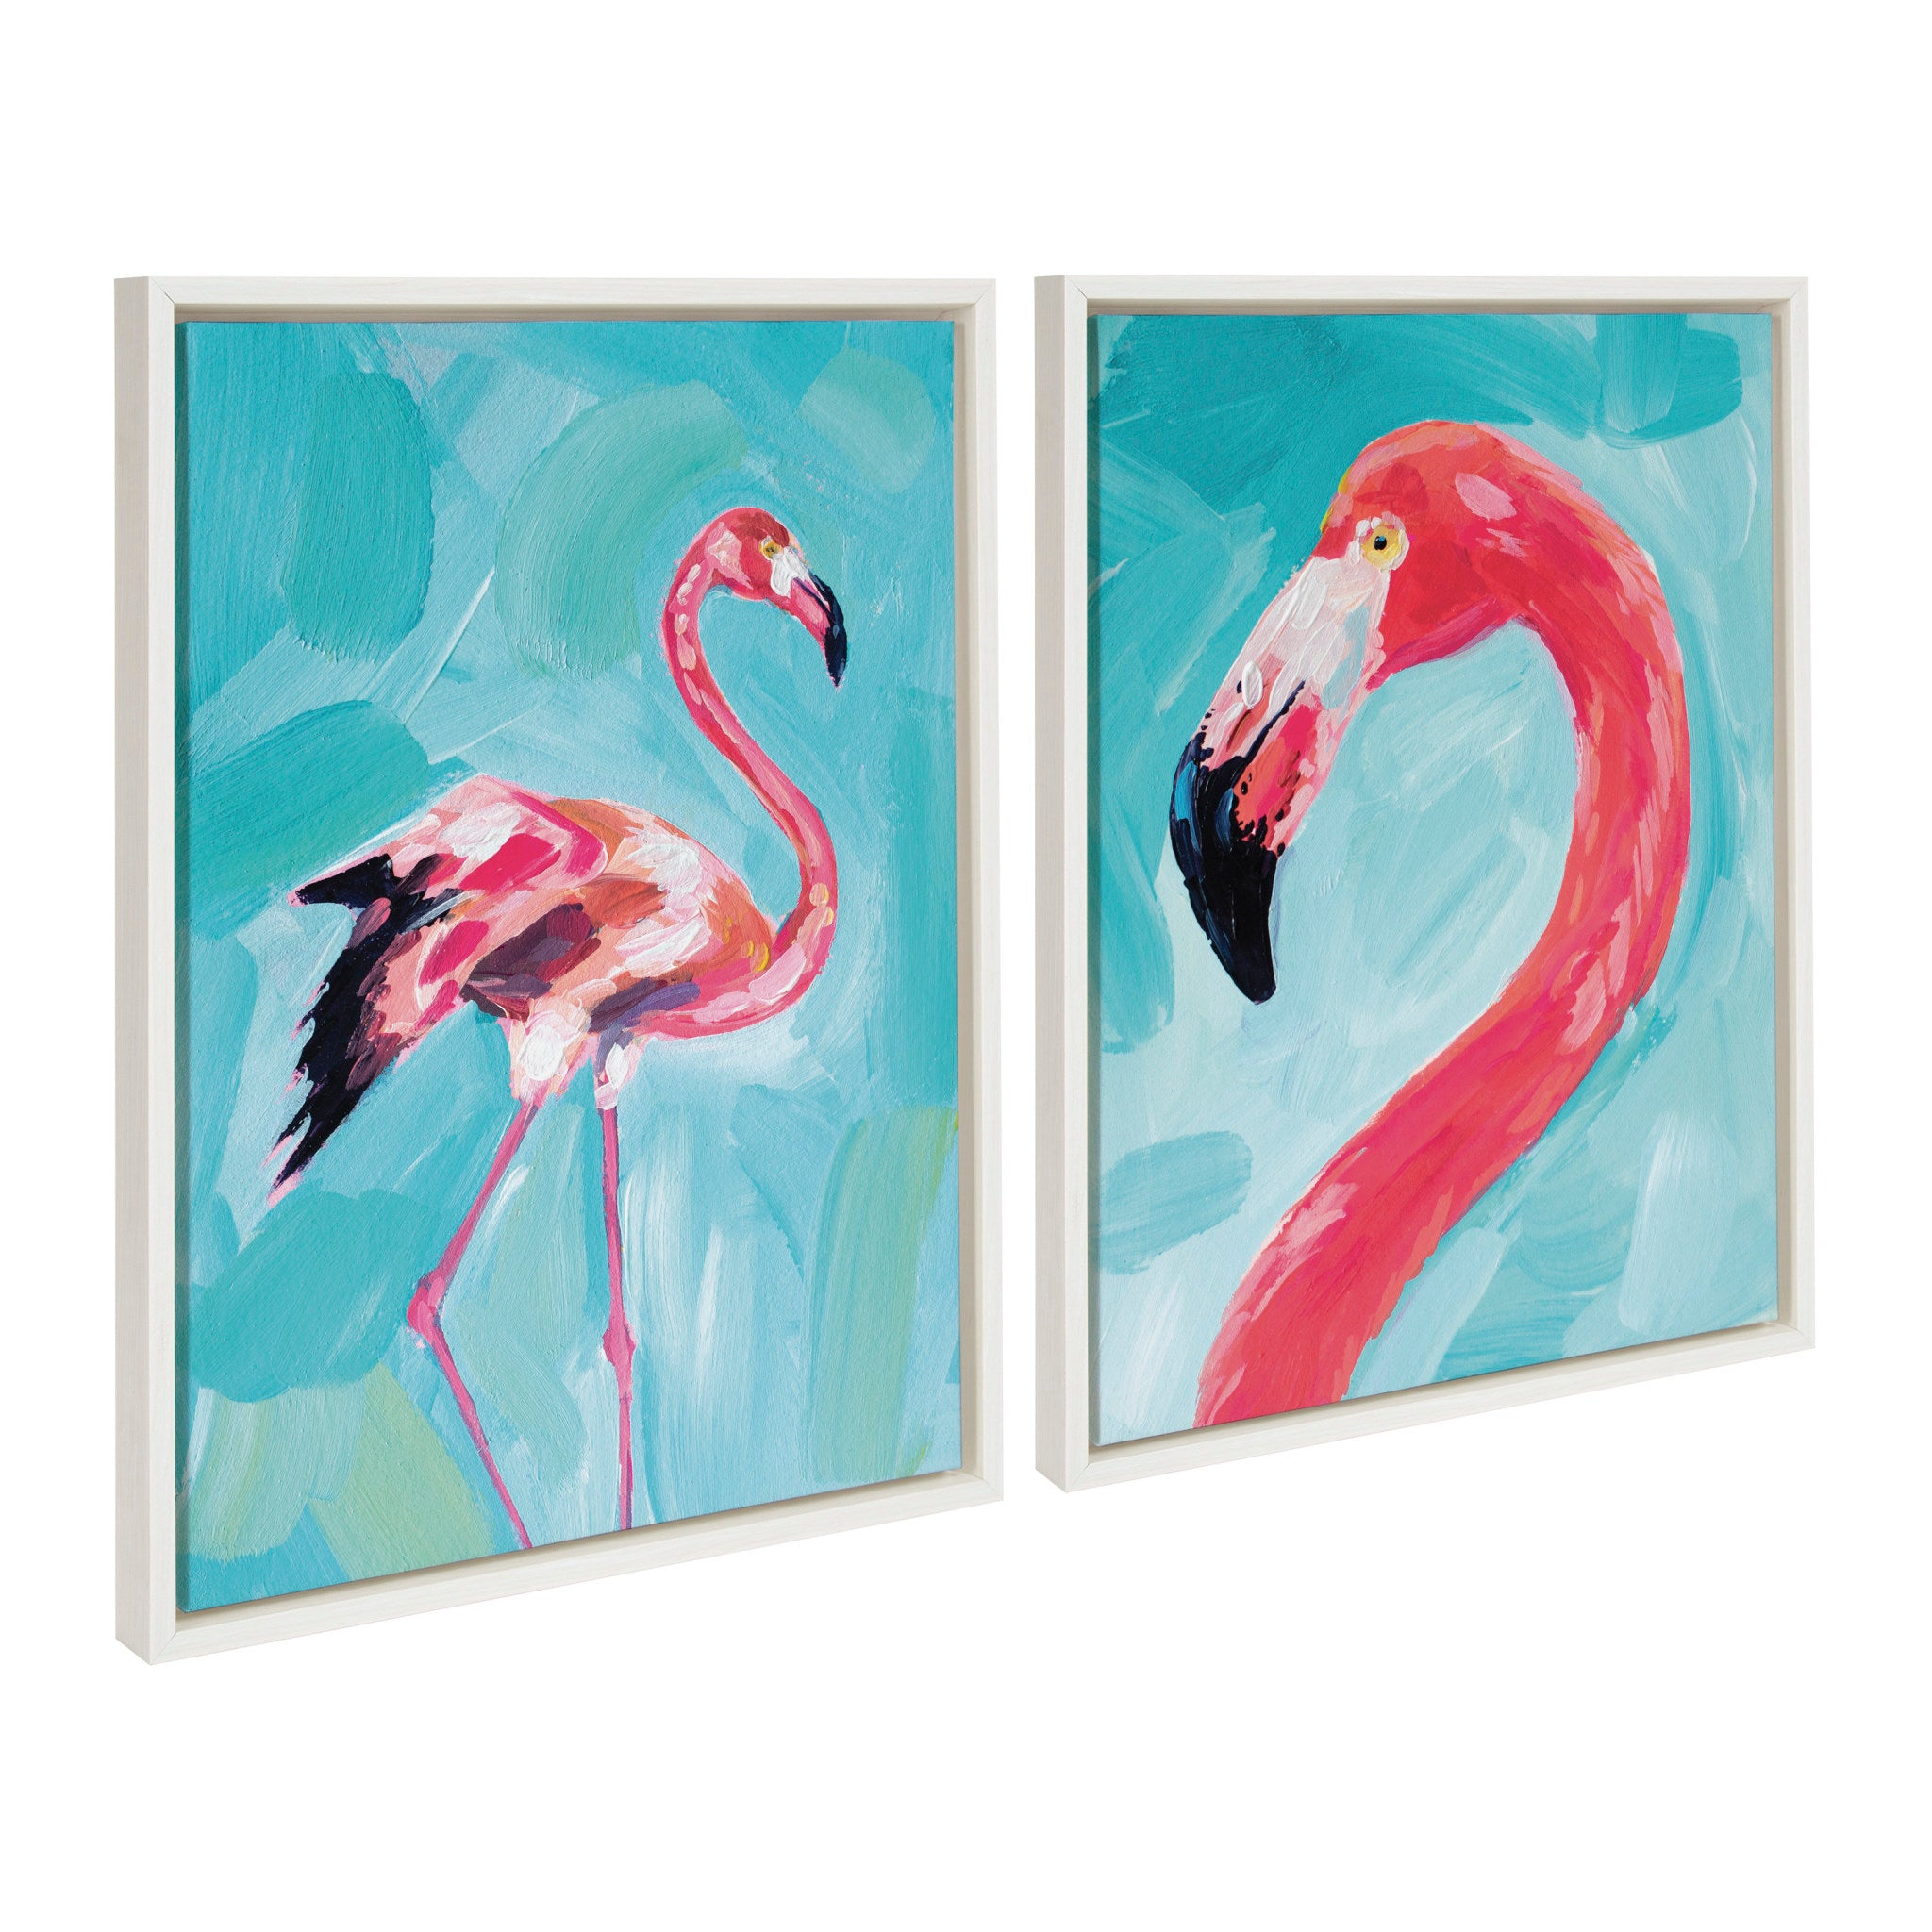 Sylvie Flamingo Study and Feathery Friend Framed Canvas Art Set by Rachel Christopoulos